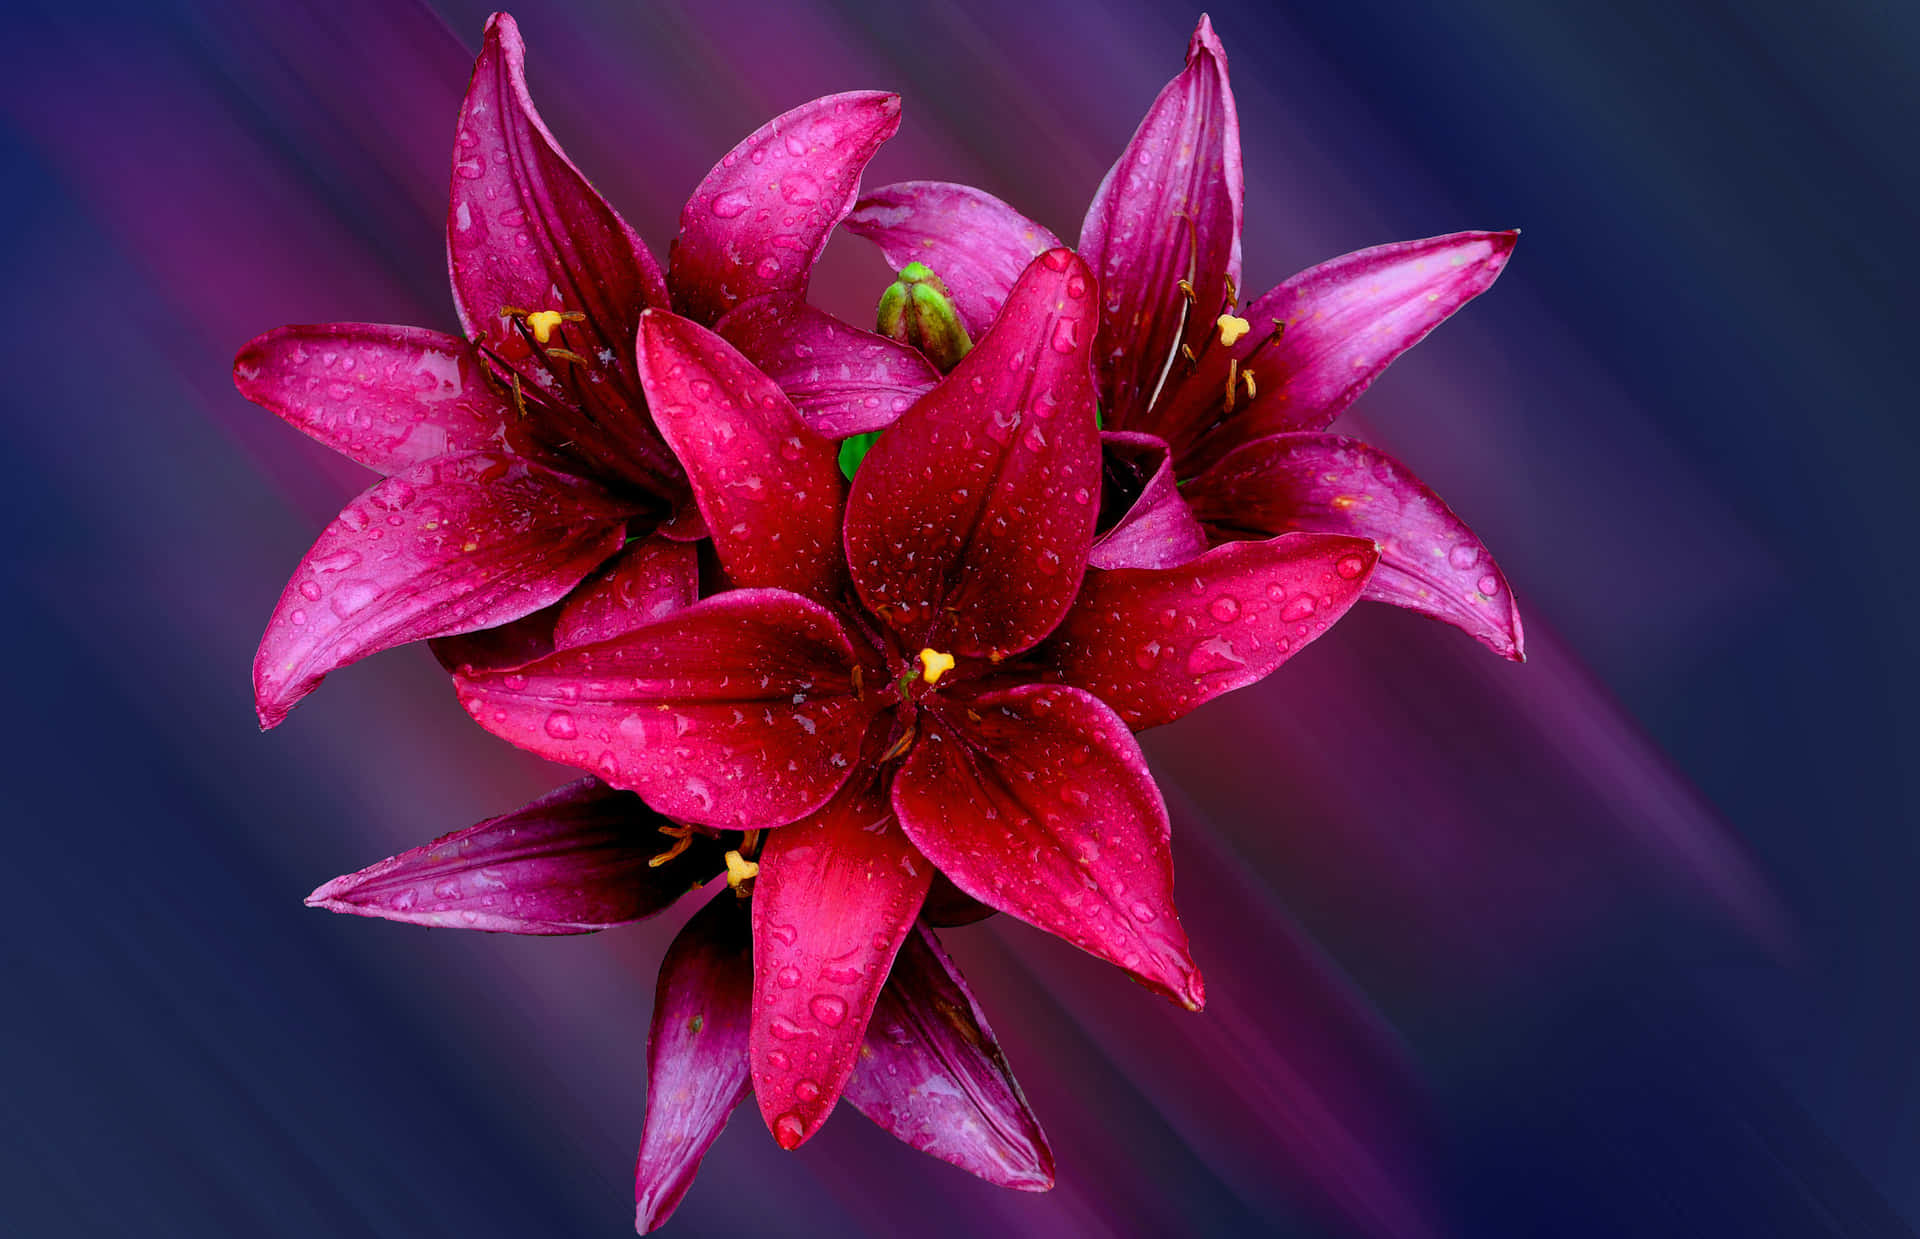 Captivating Beauty of Red Lily Flowers Wallpaper